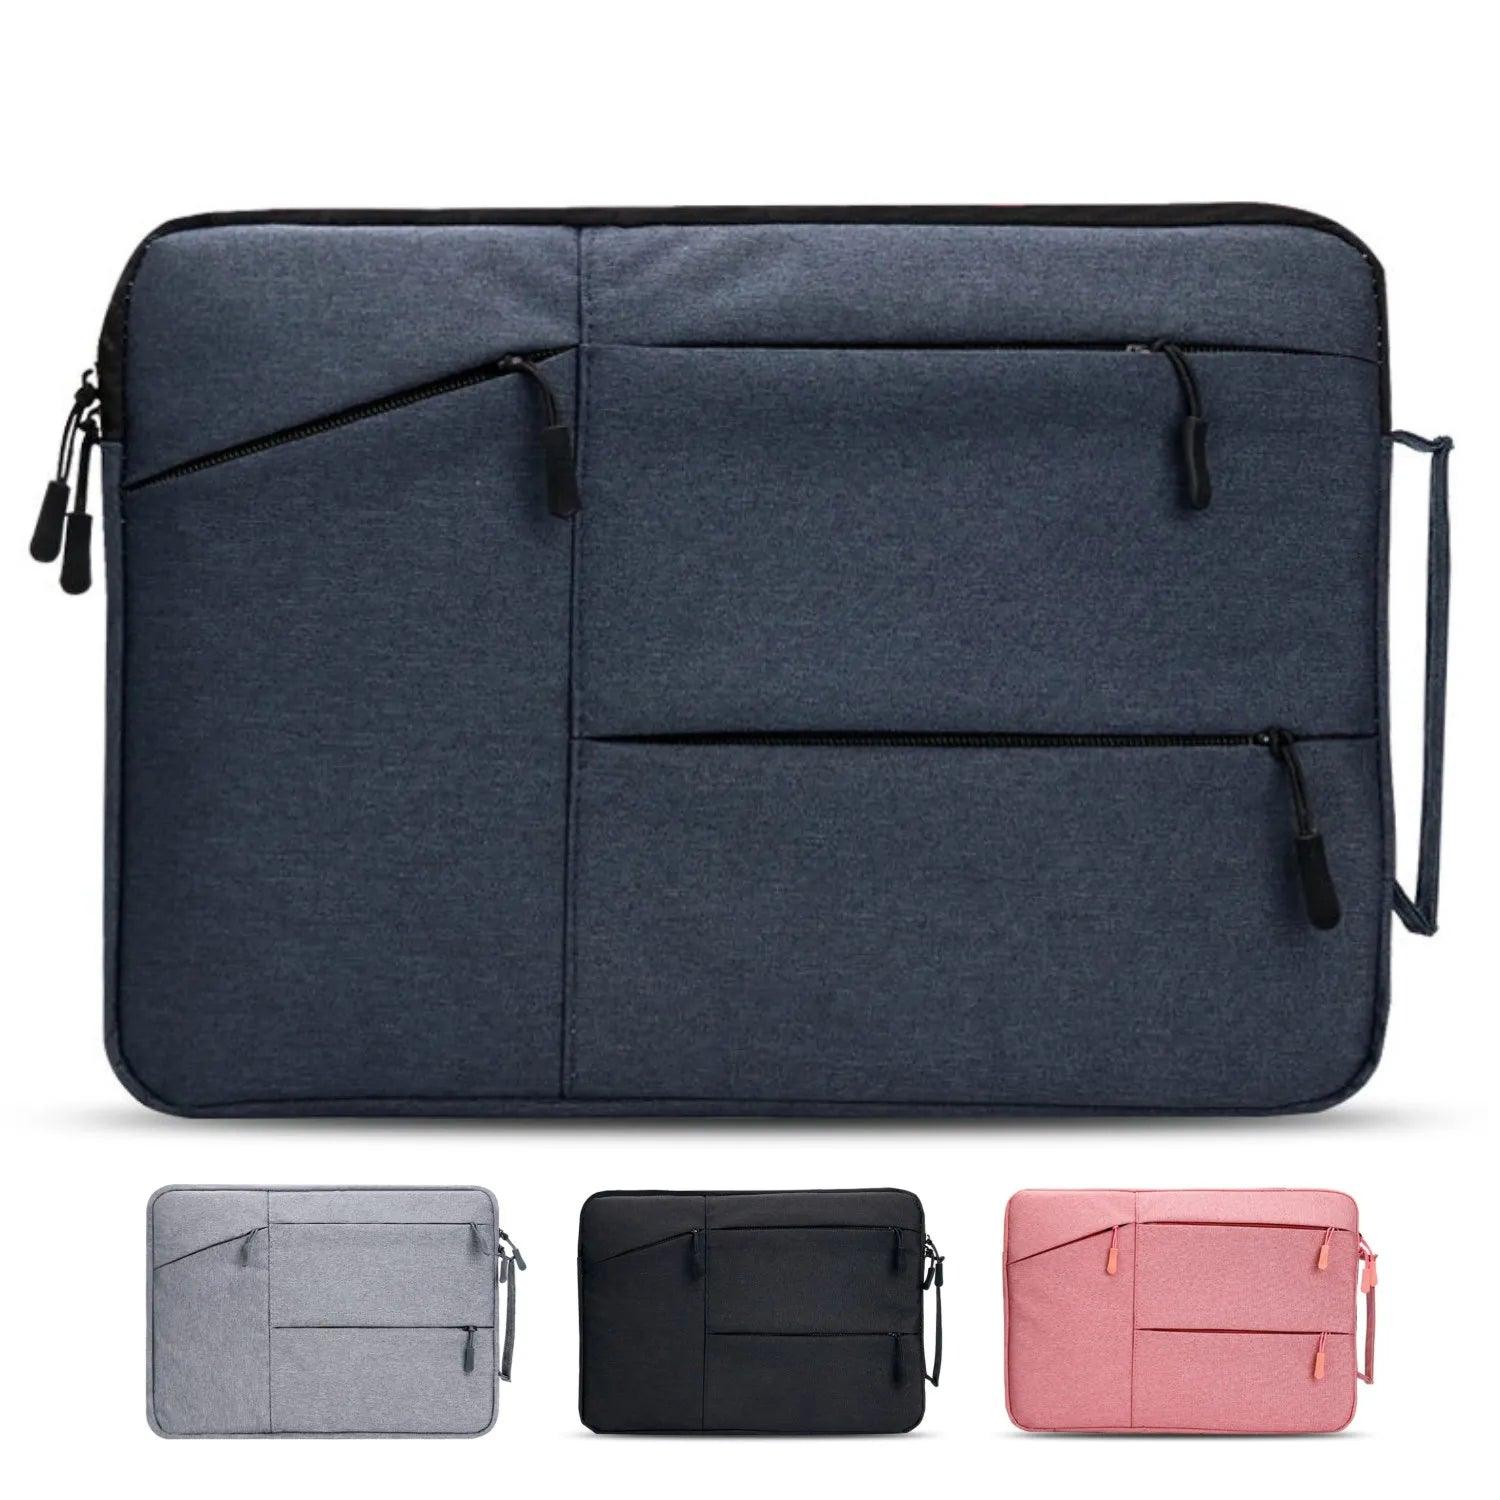 Business Laptop Sleeve Protective Case for Macbook Air Pro Redmi Mac book M1 - Red 12-15.6 Inch  ourlum.com   